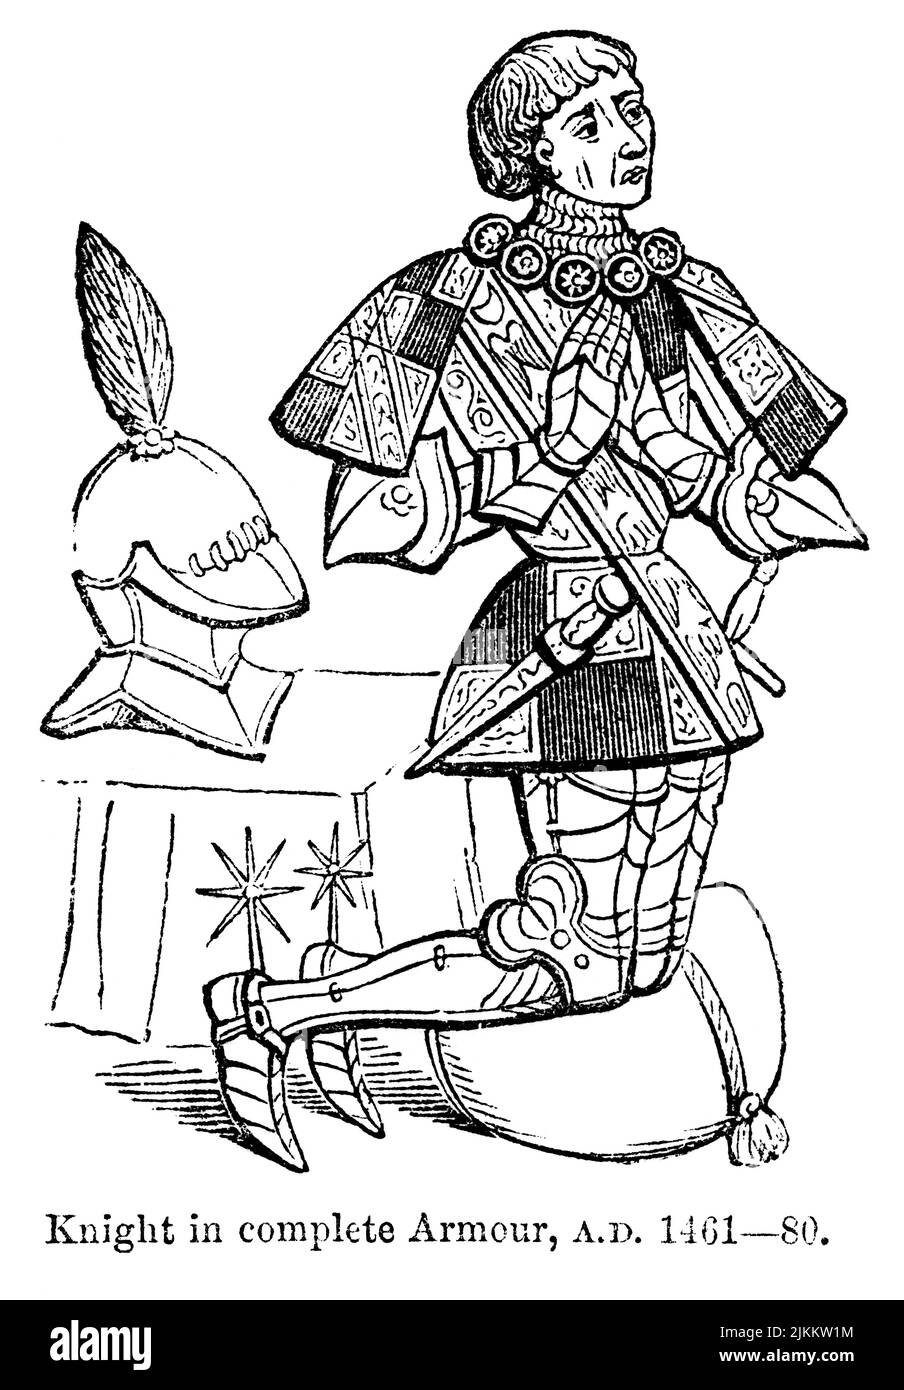 Knight in complete Armour, A.D. 1461-80, Illustration from the Book, 'John Cassel’s Illustrated History of England, Volume II', text by William Howitt, Cassell, Petter, and Galpin, London, 1858 Stock Photo